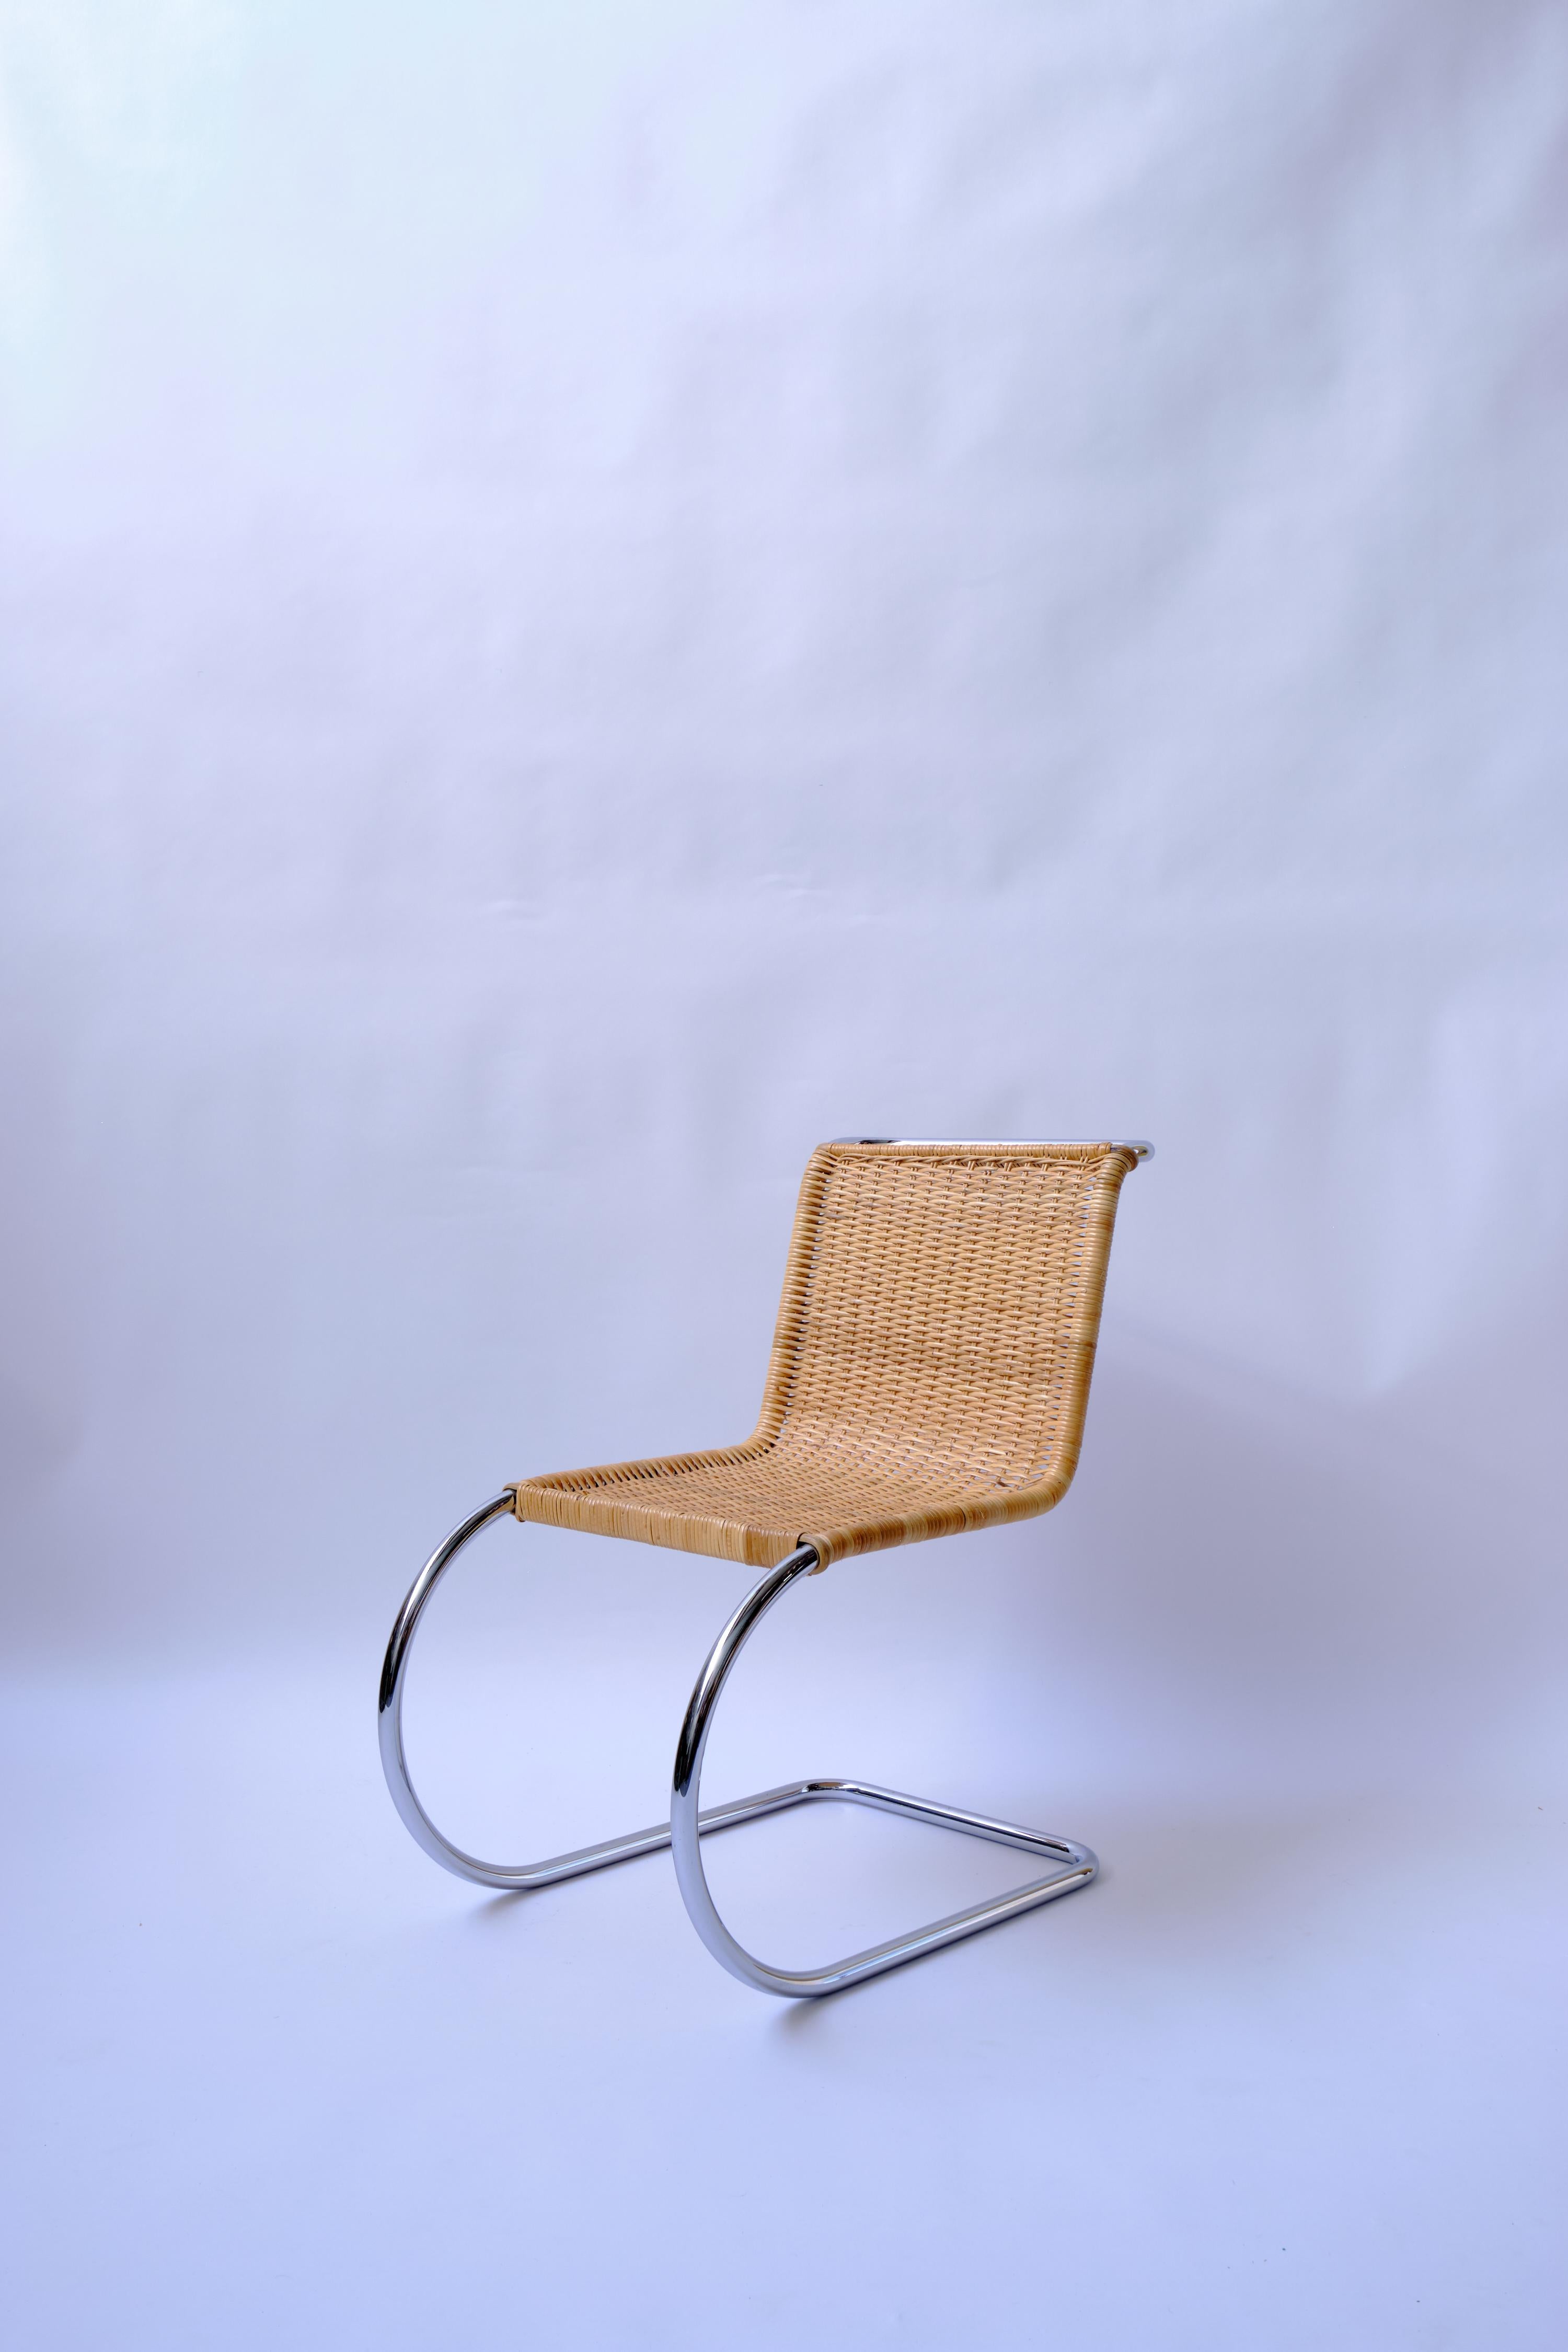 The set we have here, are from the 1977 reissue by Knoll which was in conjunction with MOMA’s exhibition Mies in New York City.

4 available

The MR10 has become an iconic chair often used to illustrate the exemplary times from which it originates. 